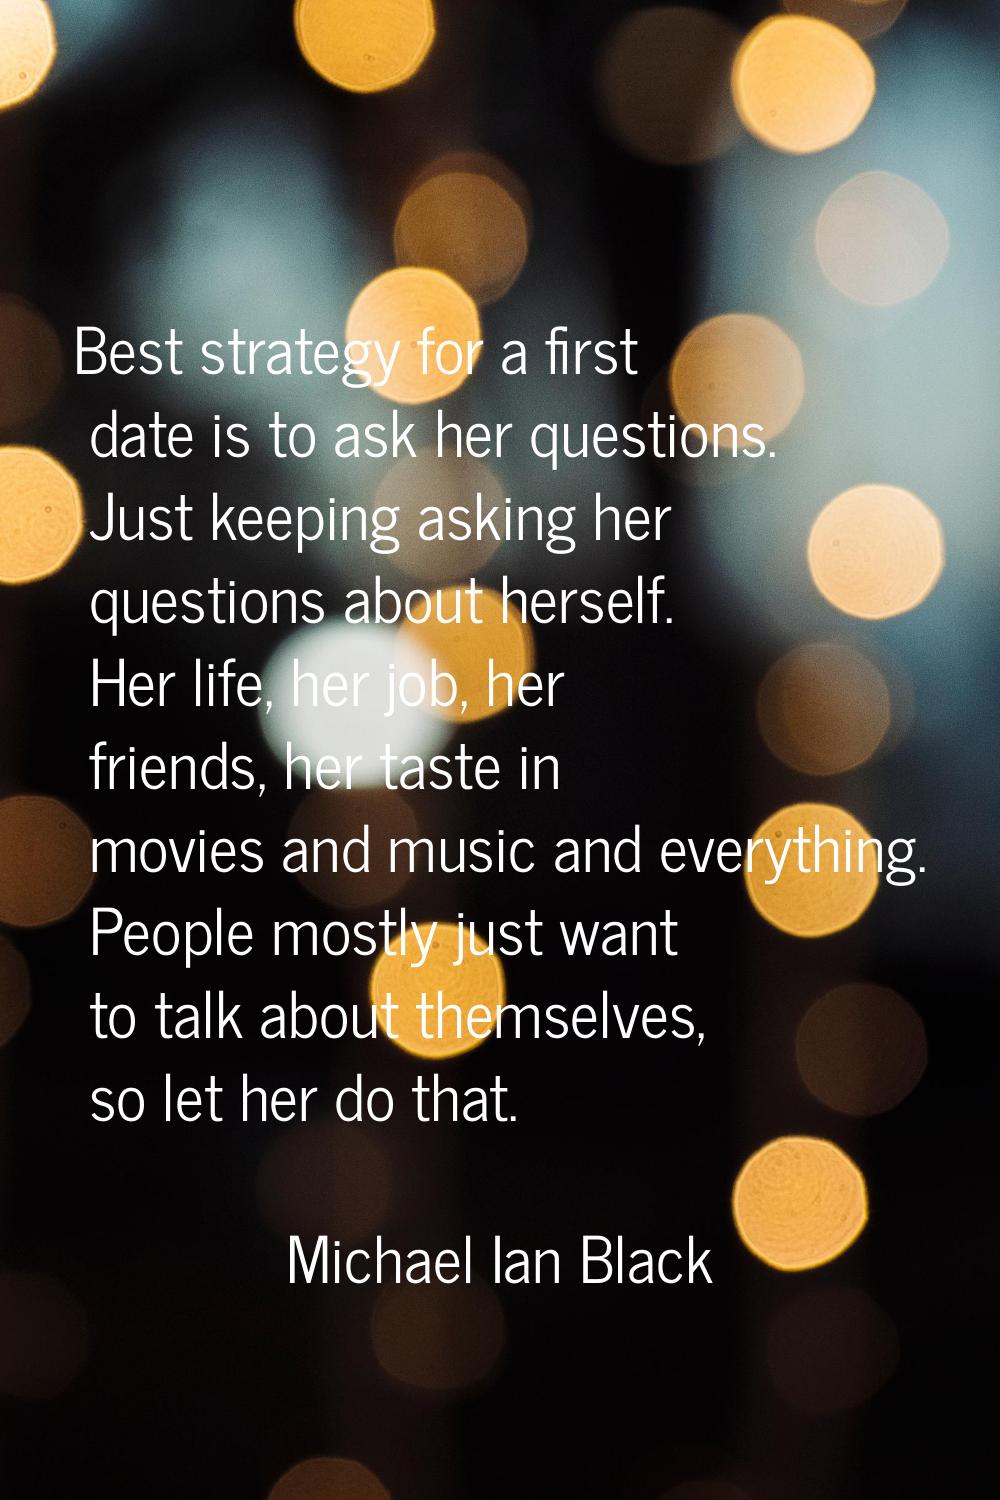 Best strategy for a first date is to ask her questions. Just keeping asking her questions about her